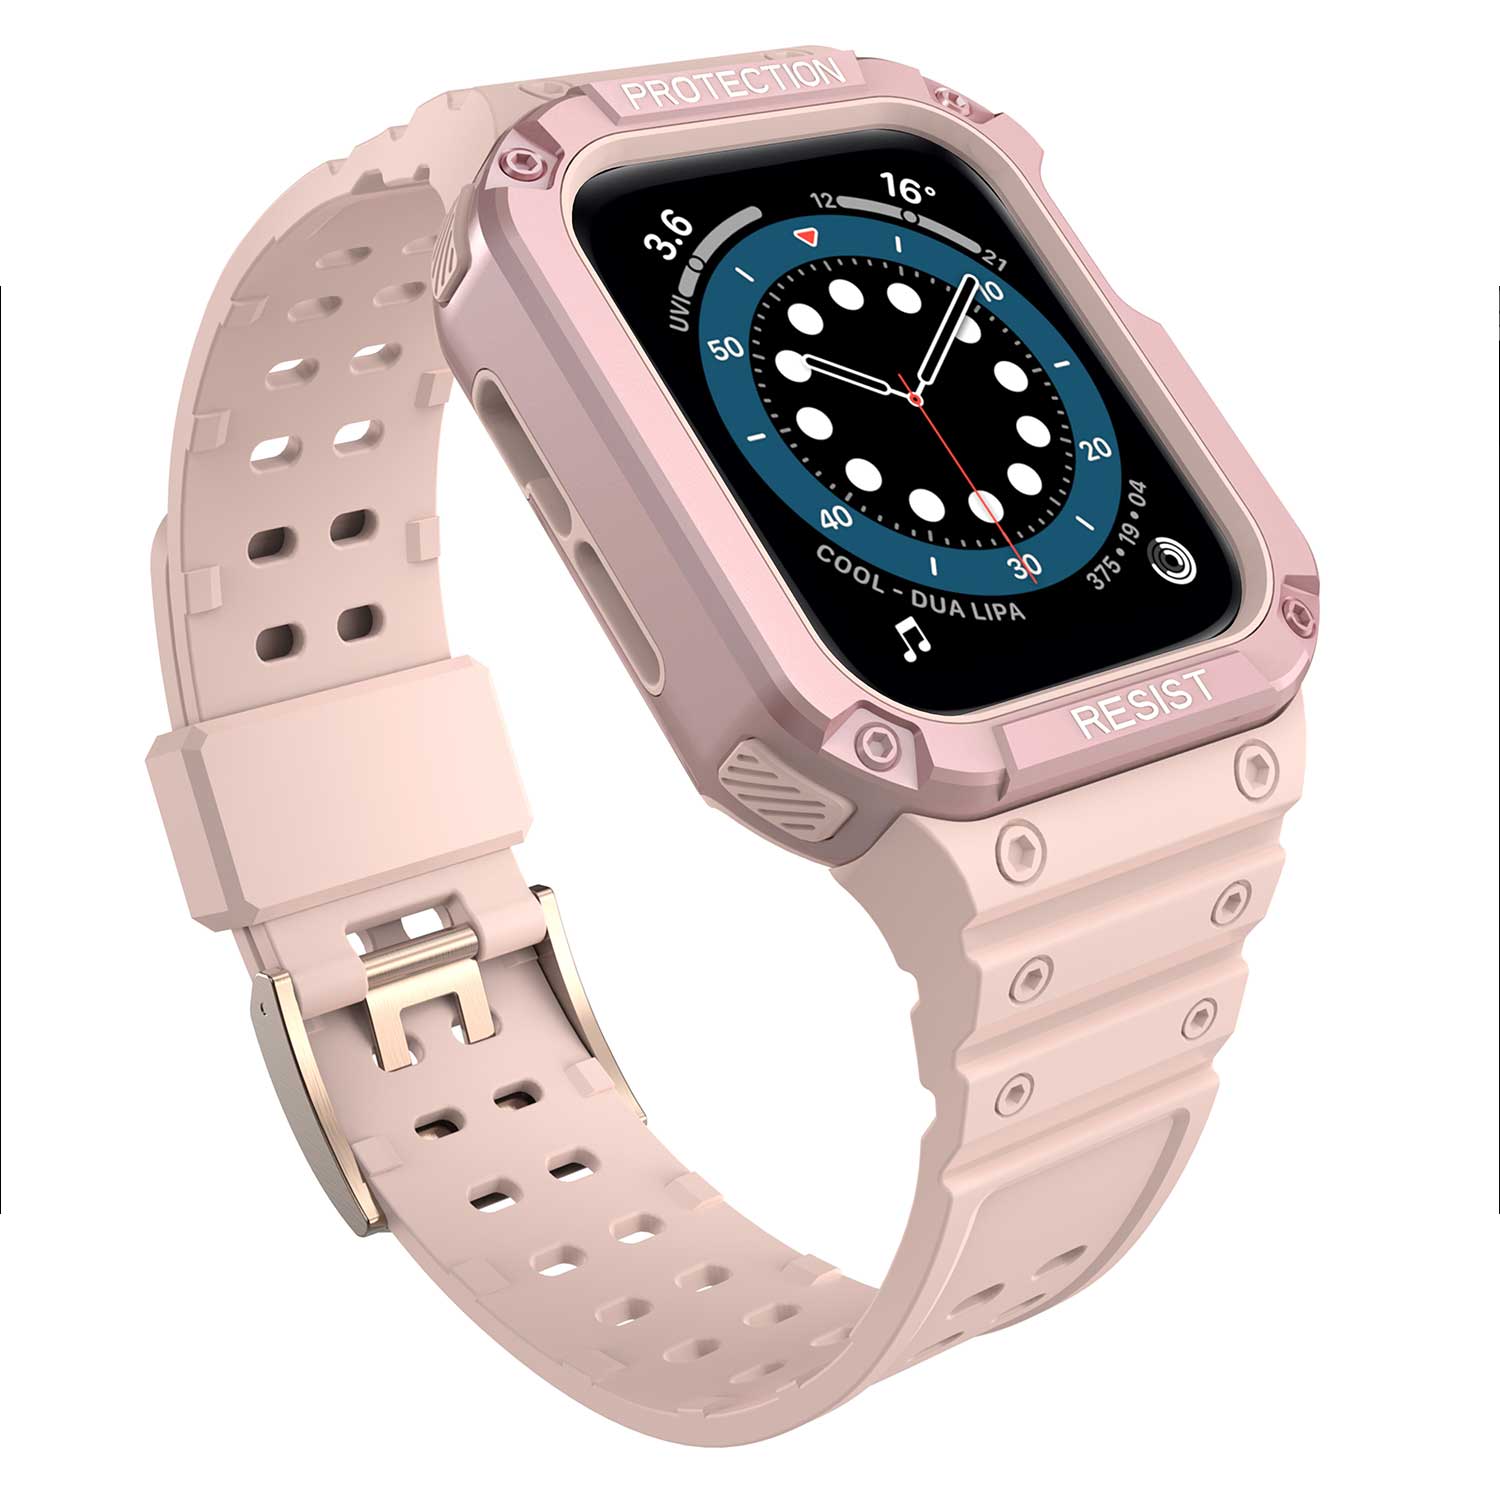 Tough On Apple Watch Band with Case Series 4 / 5 / 6 / SE 40mm Rugged Protection Pink/Pink